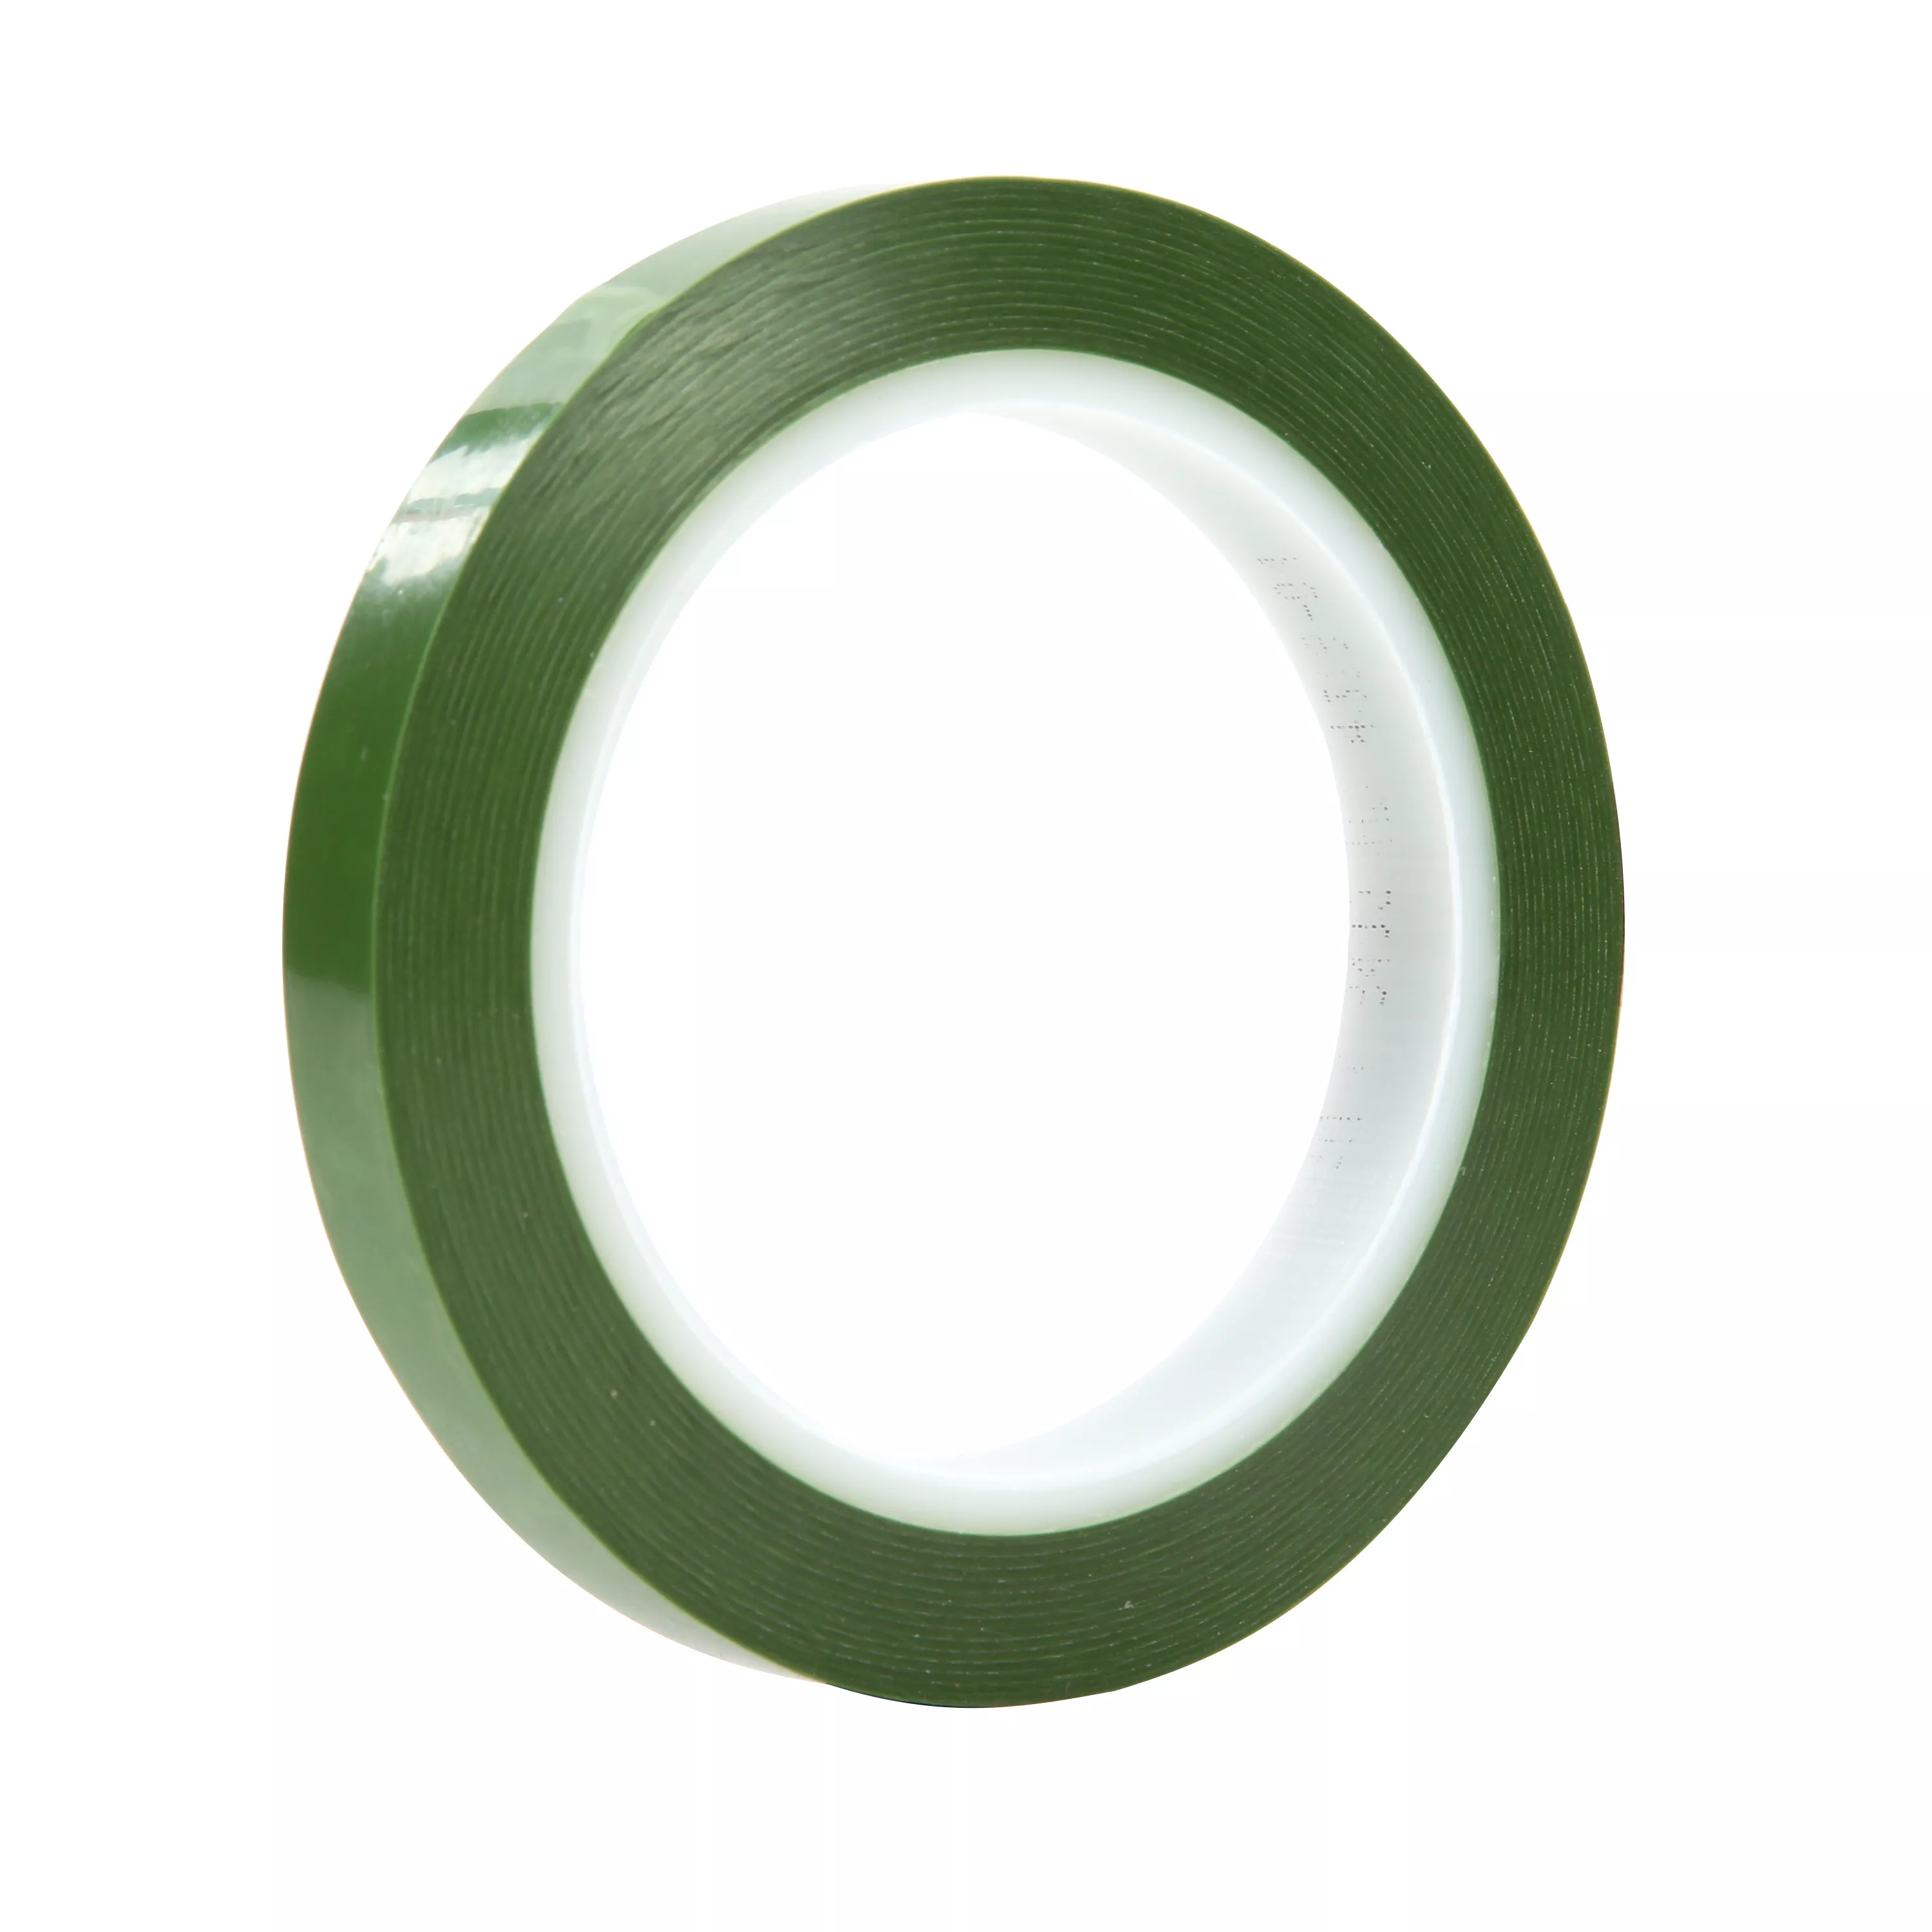 3M™ Polyester Tape 8992, Green, 1/2 in x 72 yd, 3.2 mil, 72 Roll/Case